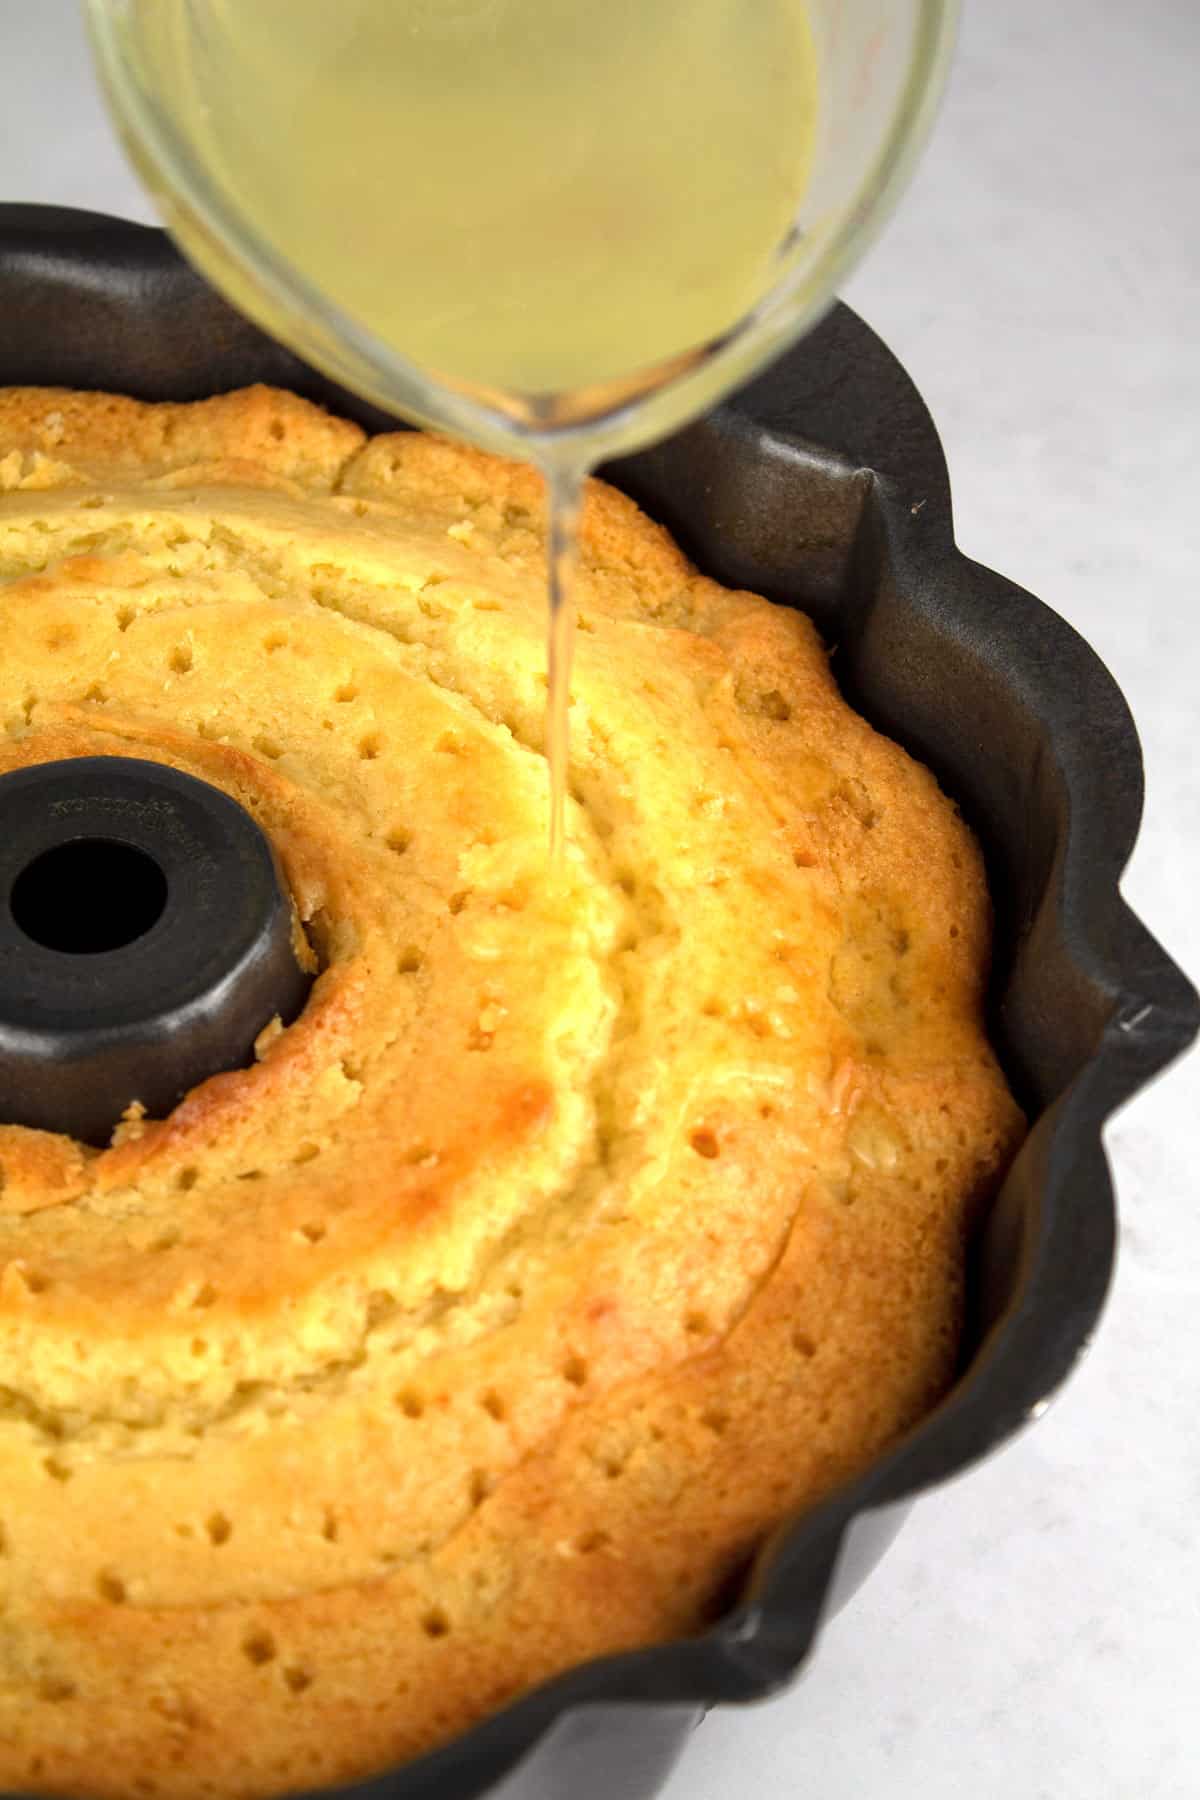 Pouring lemon simple syrup onto a bundt cake that has holes poked all over the top and is in a black bundt pan.